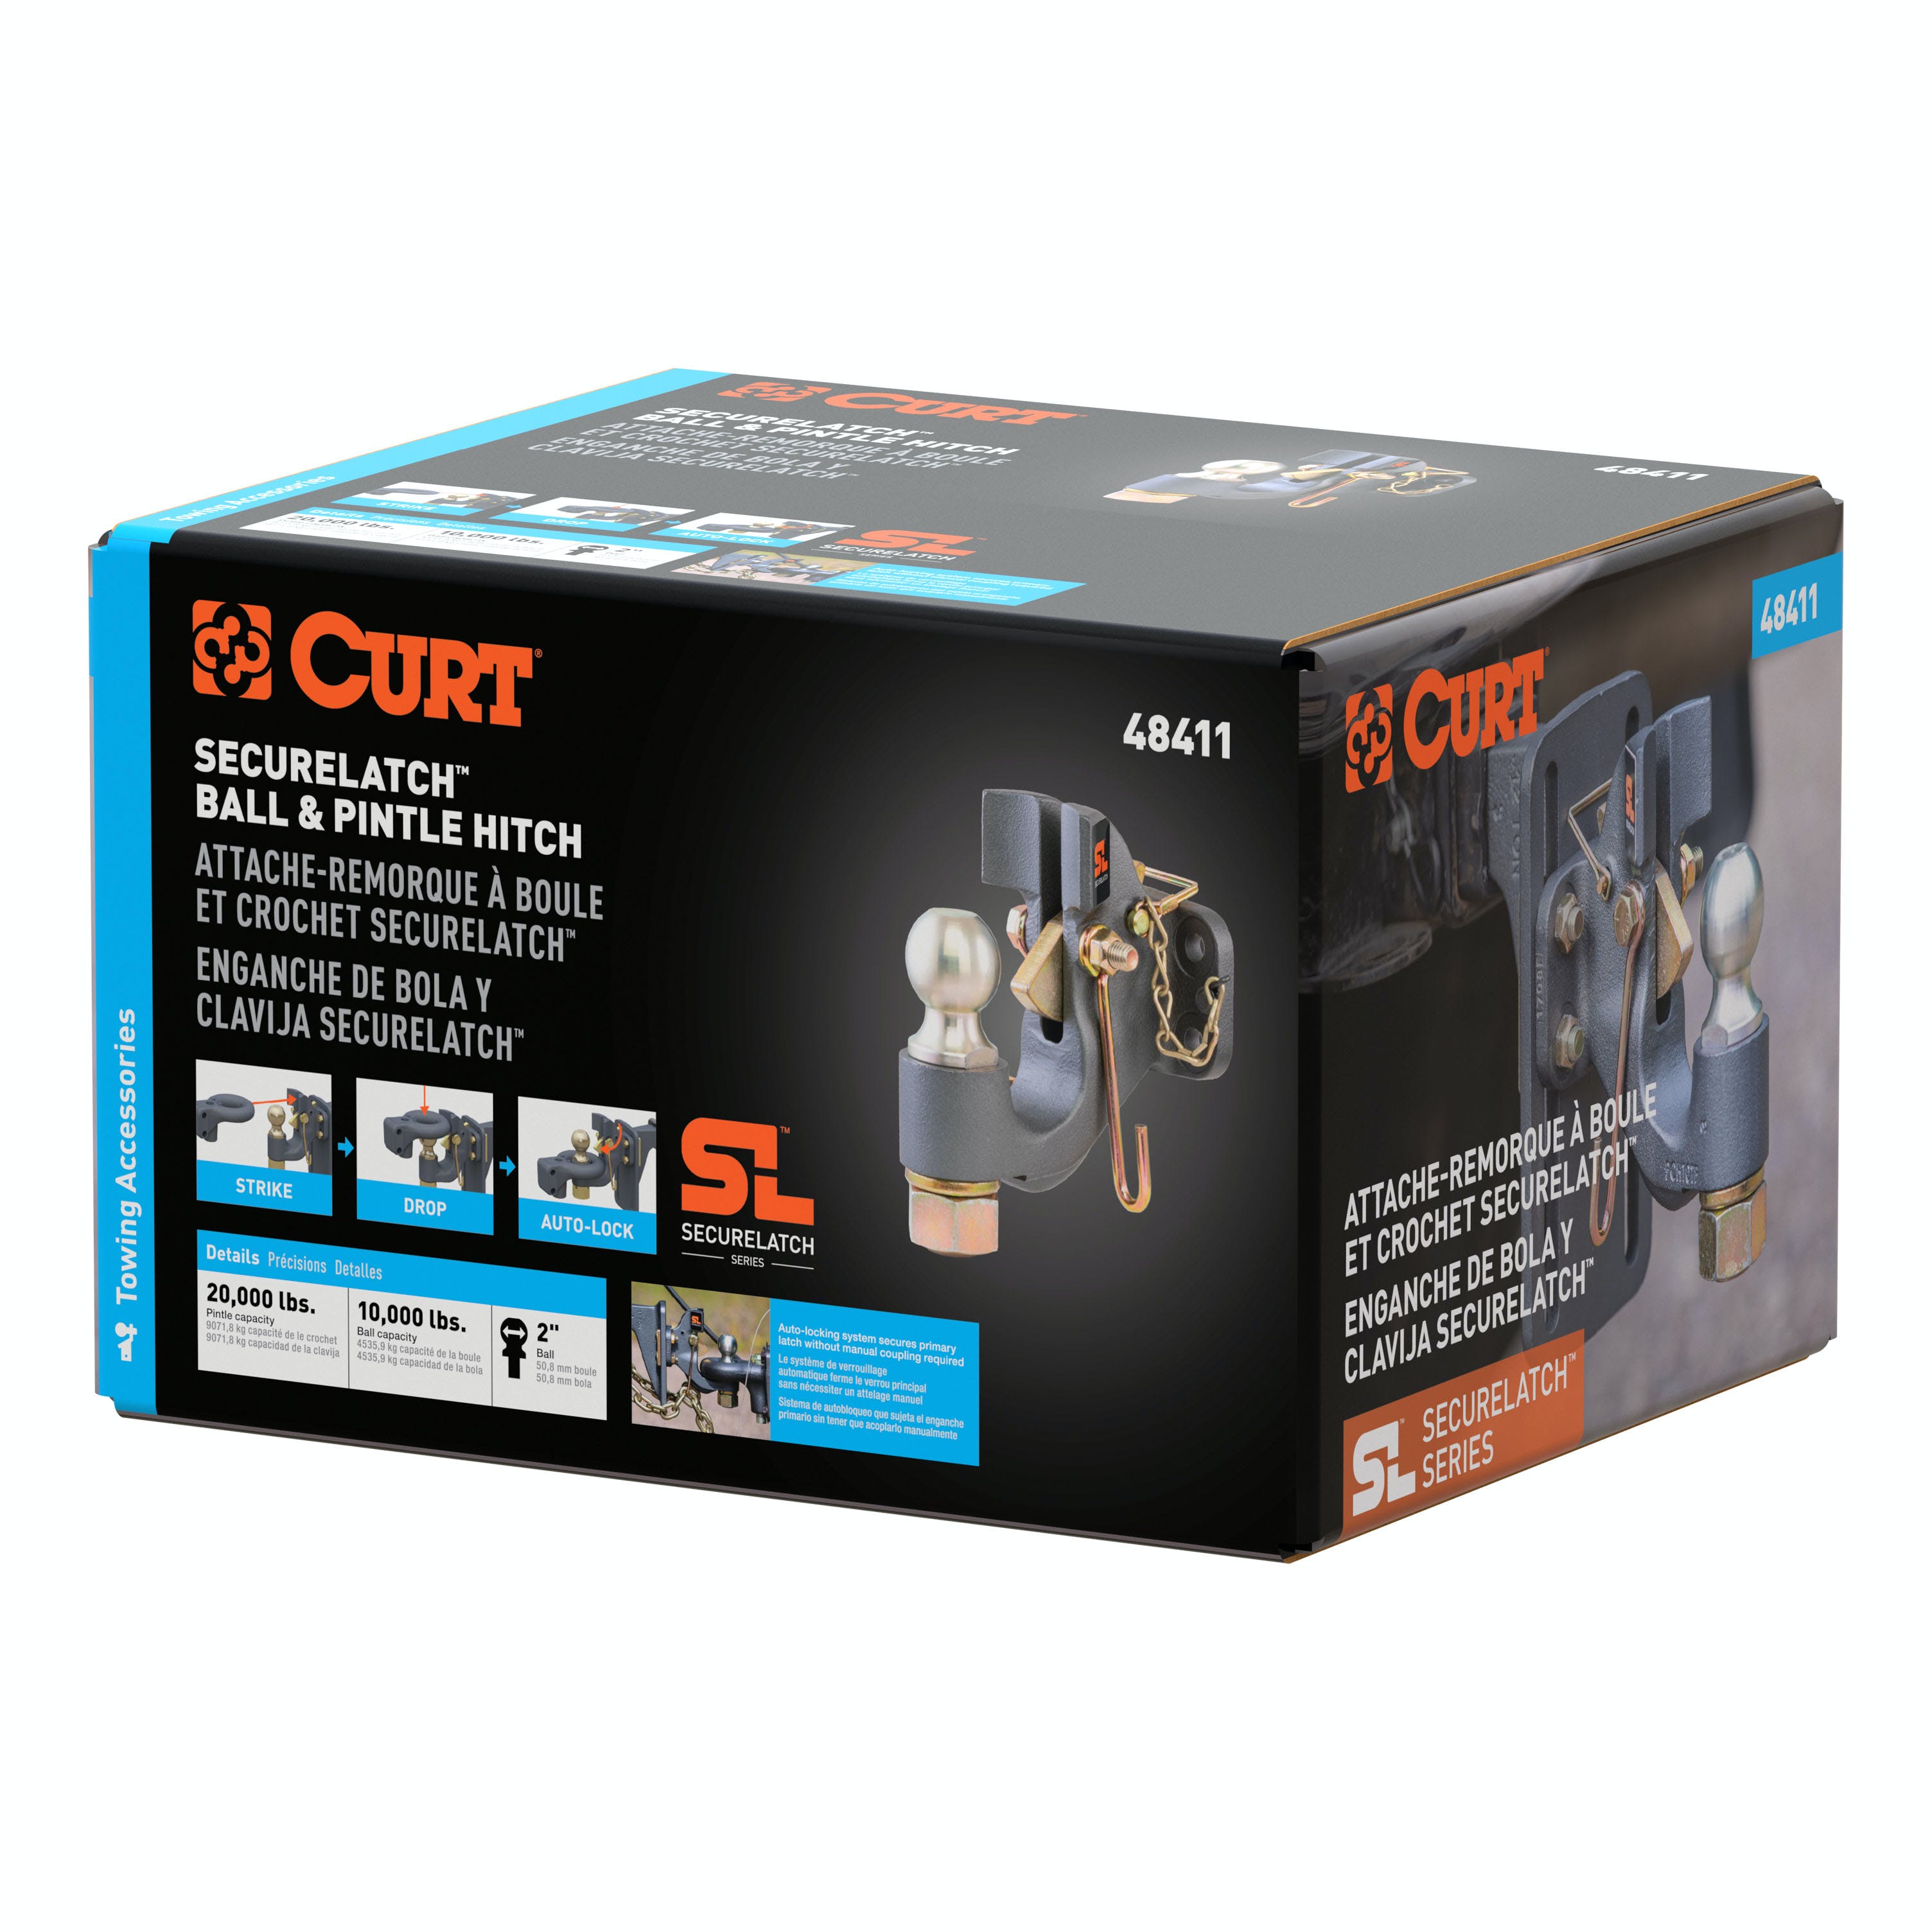 CURT 48411 SecureLatch Ball and Pintle Hitch (2 Ball, 20,000 lbs.)